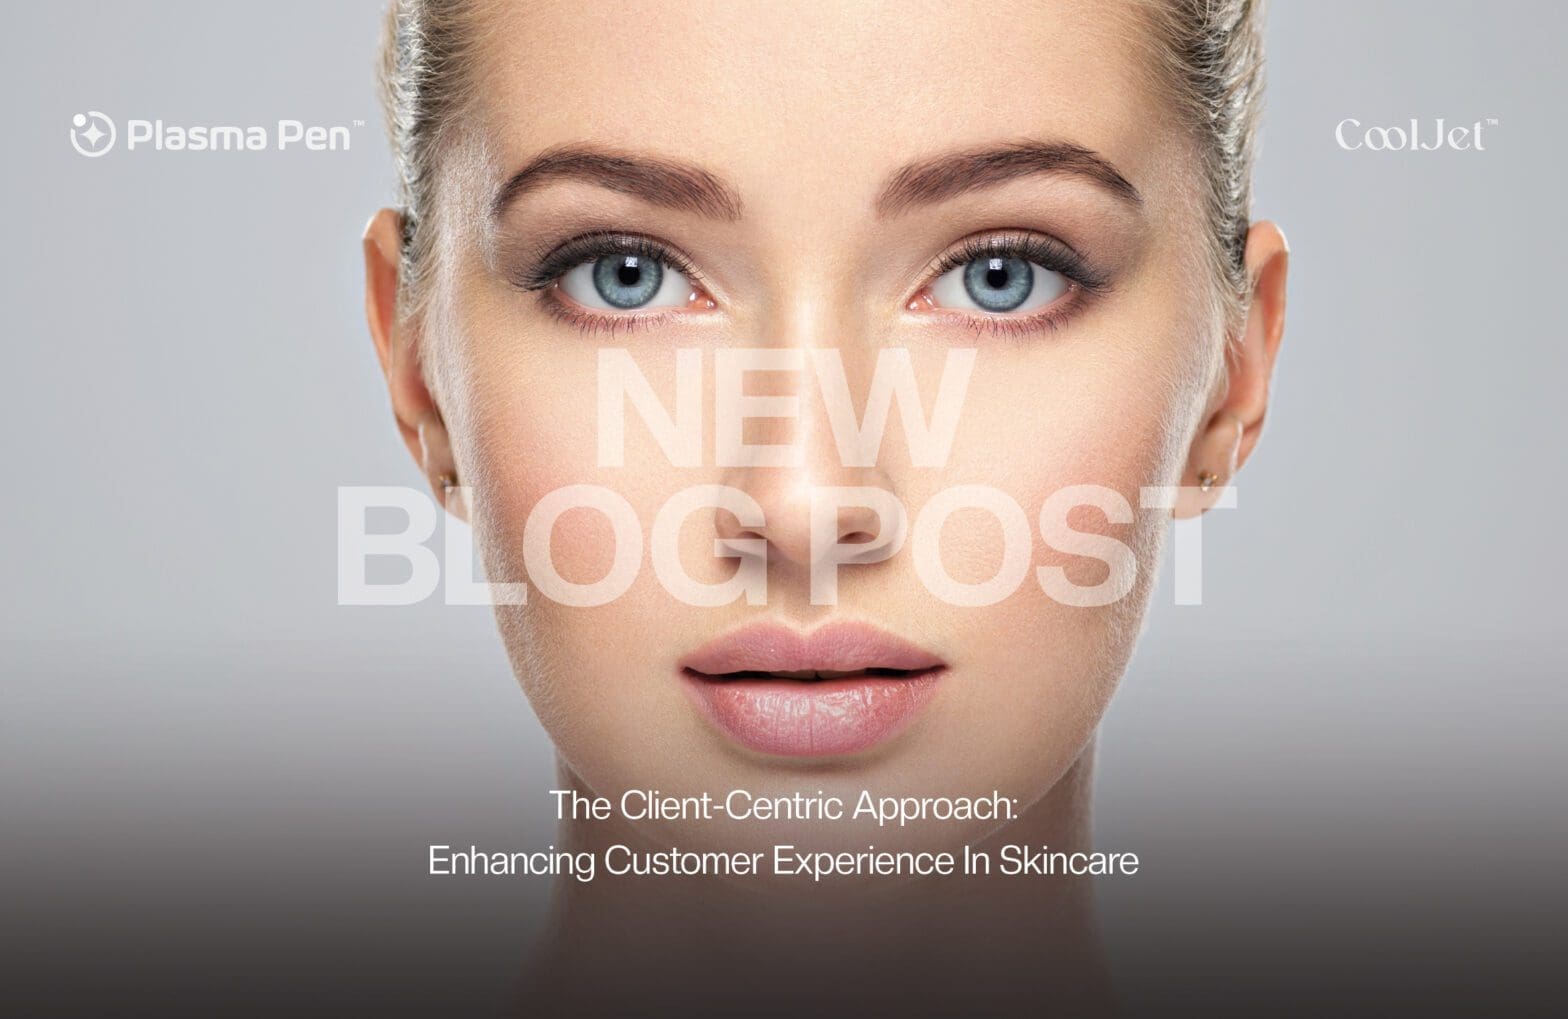 The Client-Centric Approach: Enhancing Customer Experience in Skincare